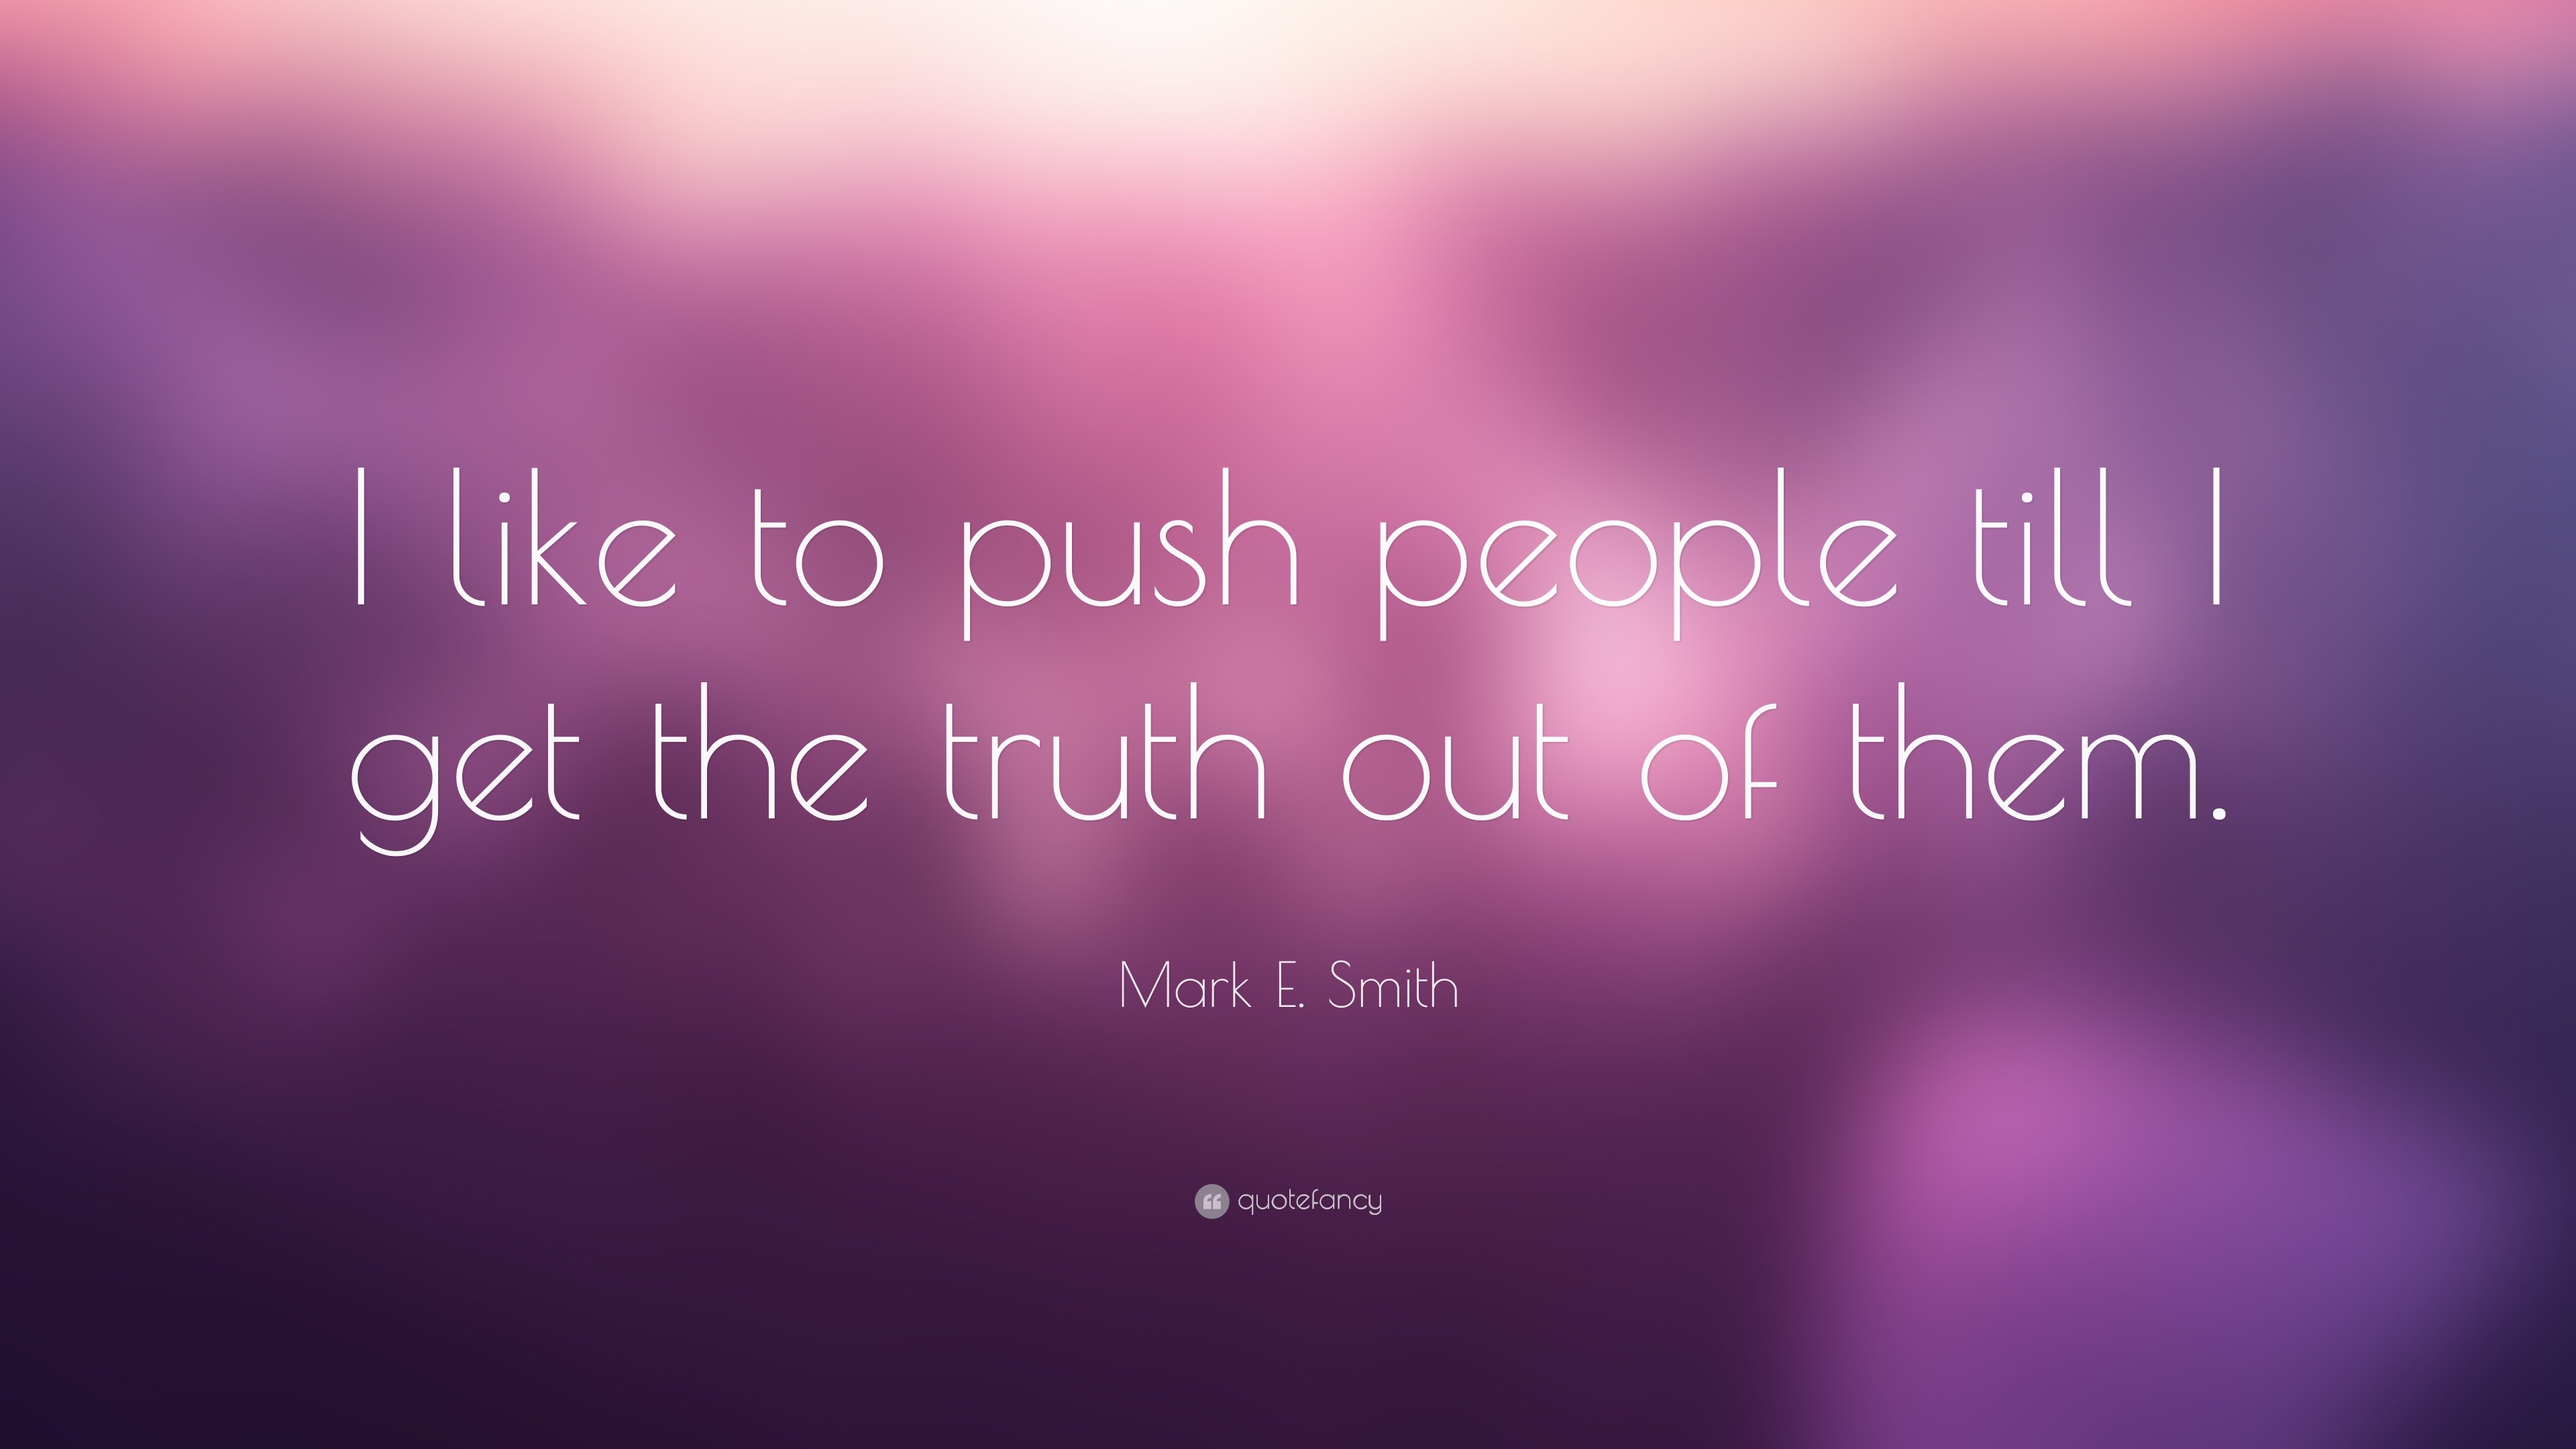 Mark E. Smith Quote: “I like to push people till I get the truth